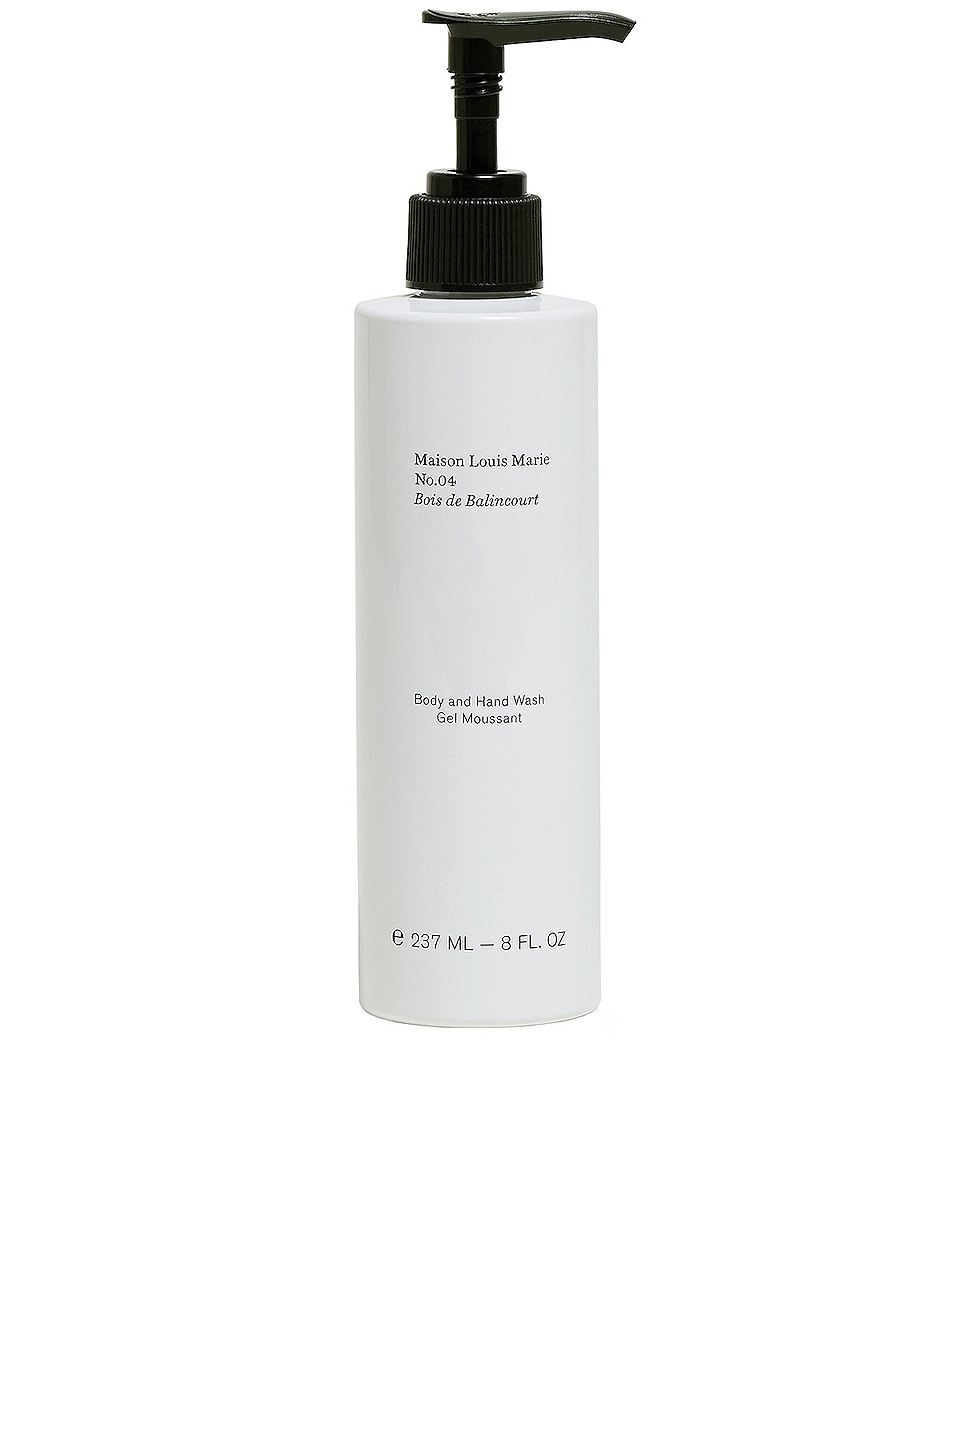 No.04 Bois de Balincourt Body and Hand Wash in Beauty: NA